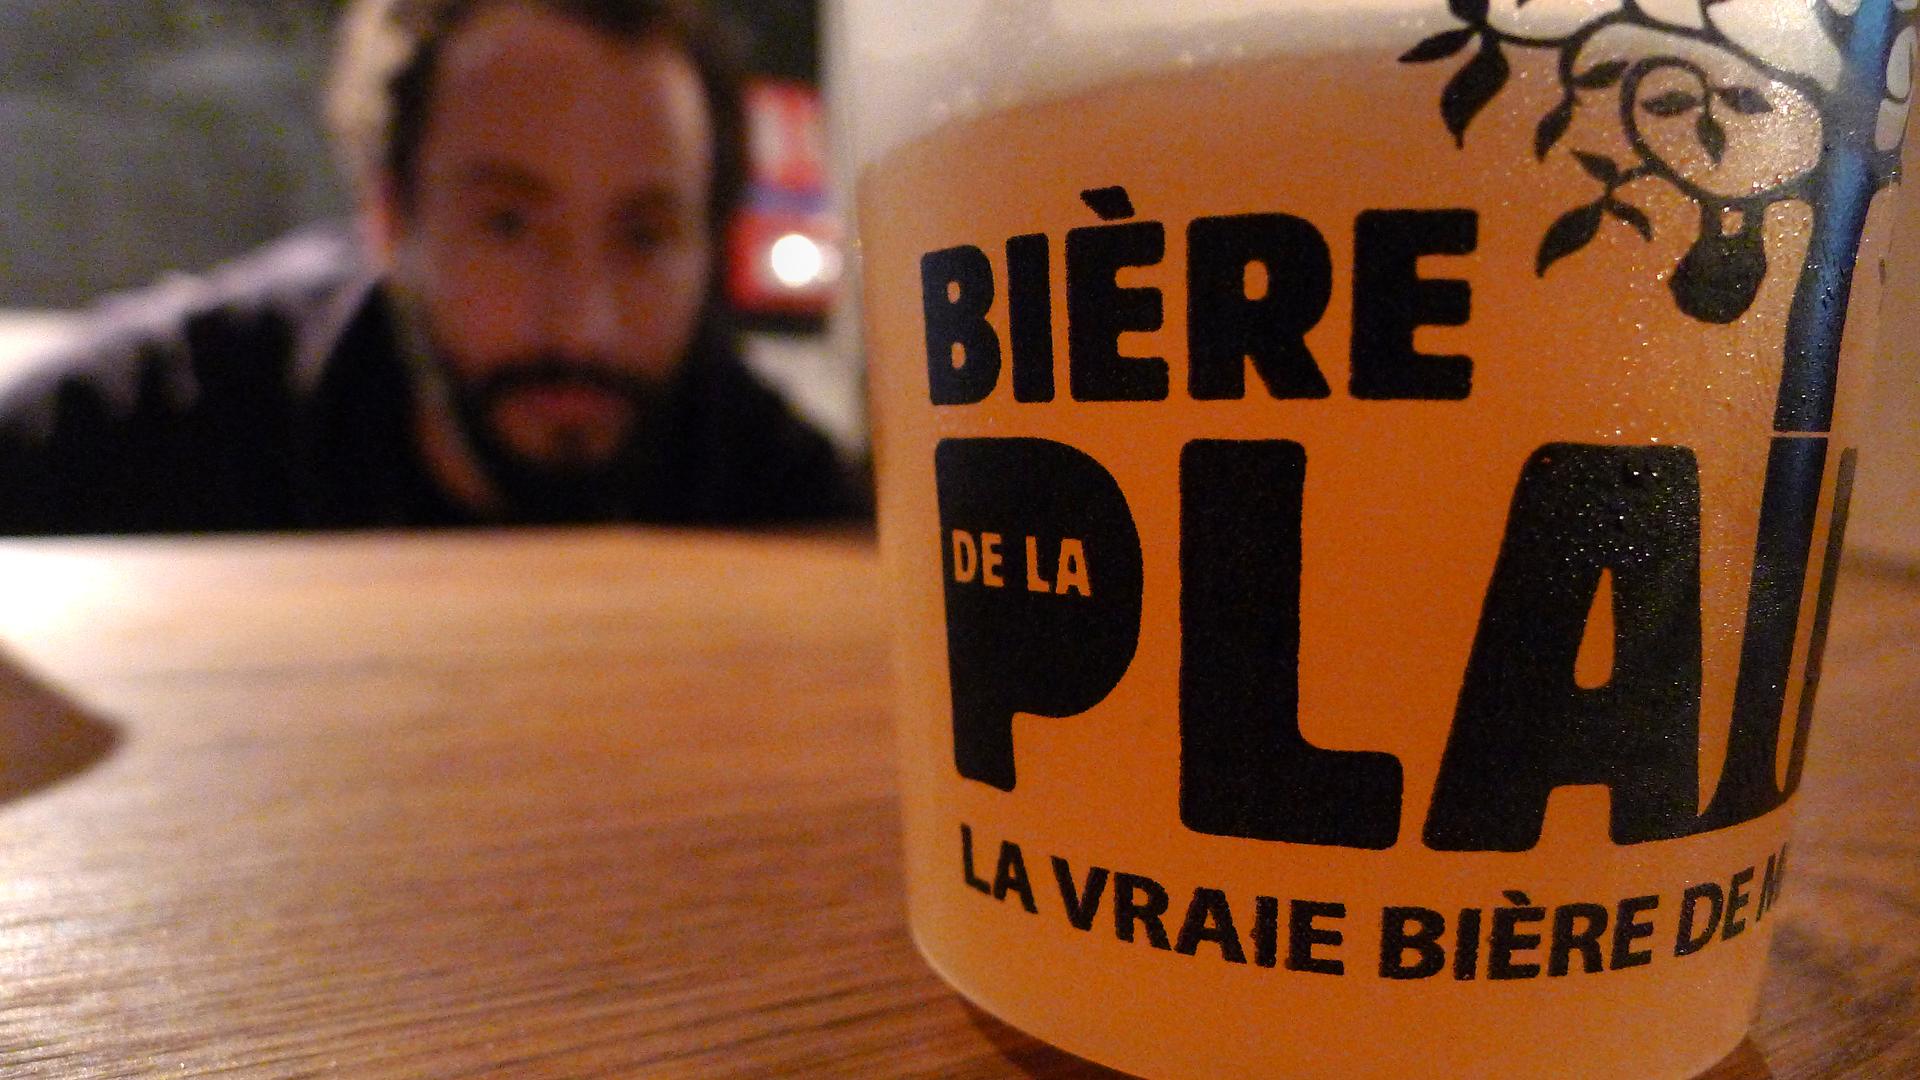 Salem Haji, co-owner of one of the few microbreweries in France, inspects his latest blonde IPA at his brewery Biere de la Plaine in downtown Marseille.